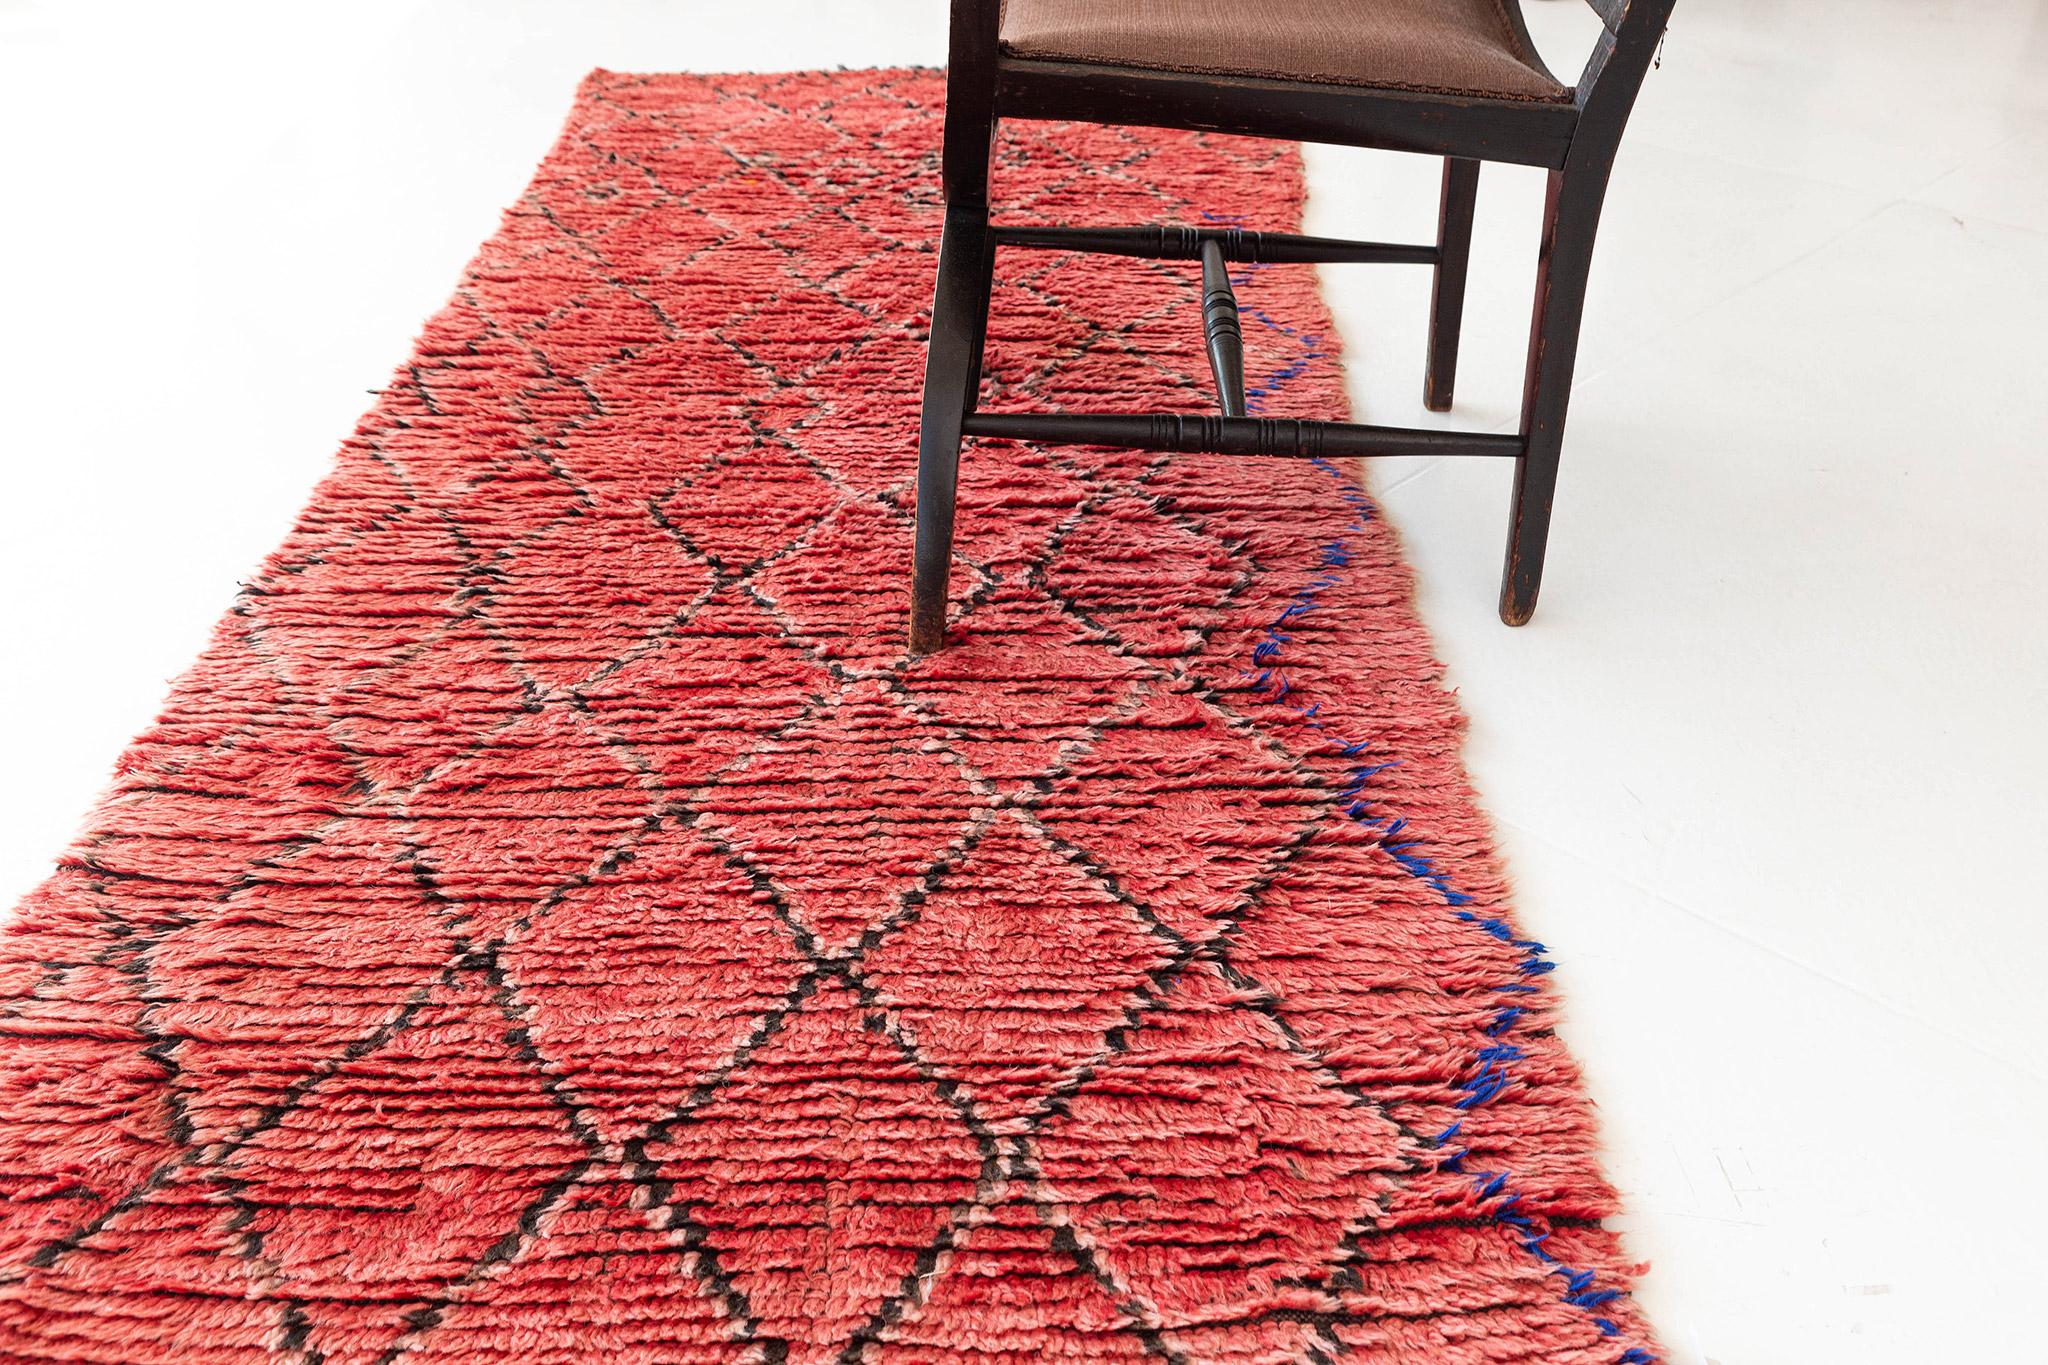 Deep coral red pile field with a lattice pattern in pink and gray with incidents of brilliant blue. A vivid vintage piece from the Boujad region of Morocco. 